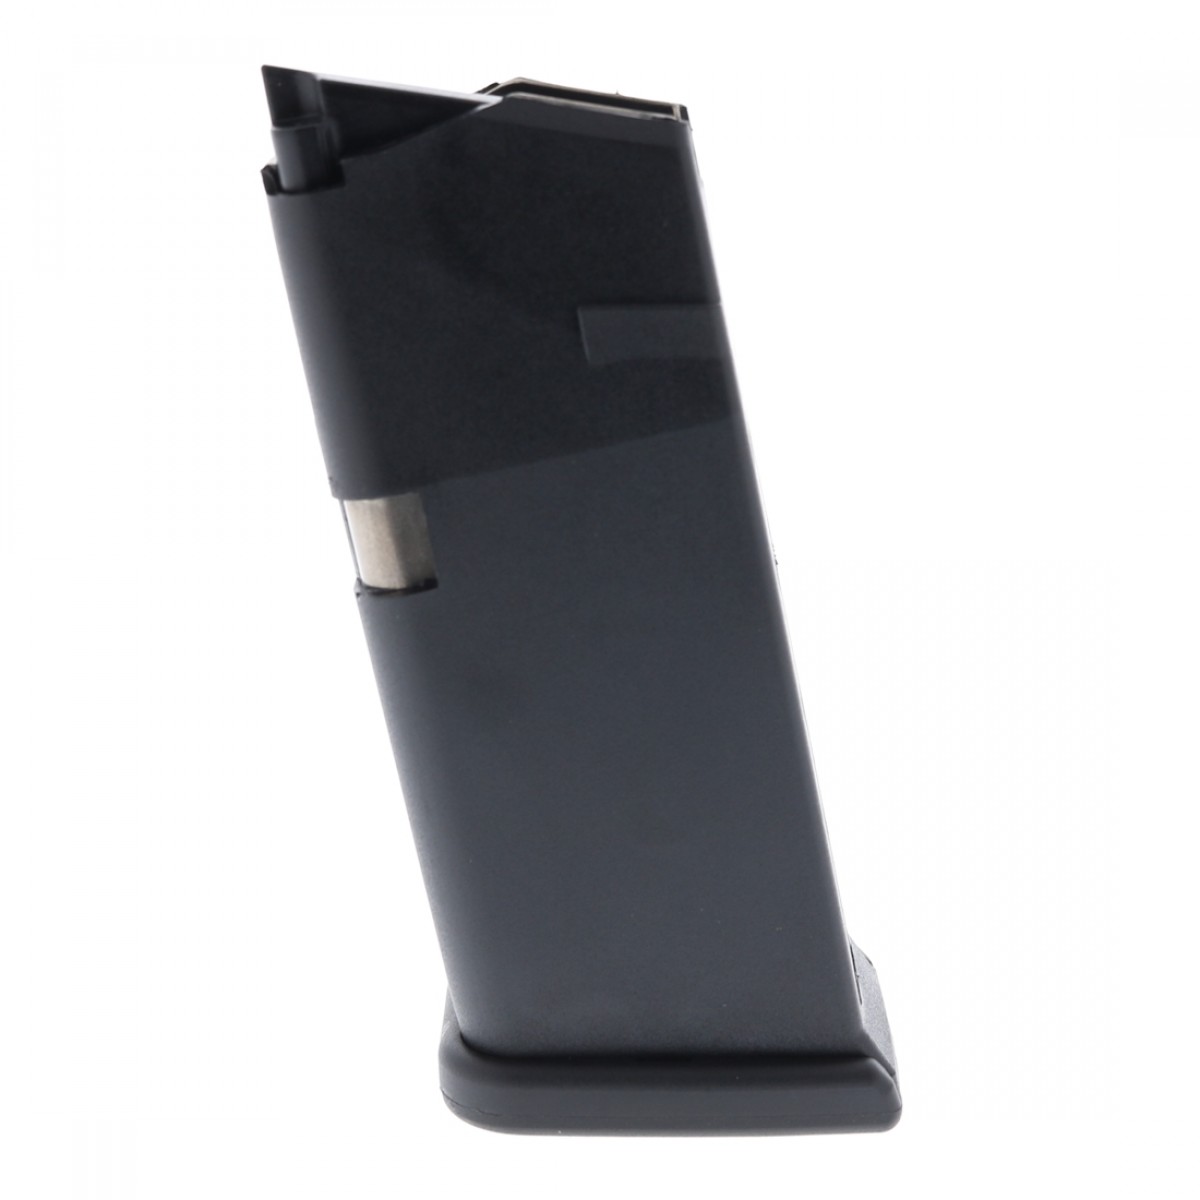 ETS Elite Tactical Magazine Fits Glock 30 .45 ACP 9 Round 9rd Mag Glk-30 for sale online 